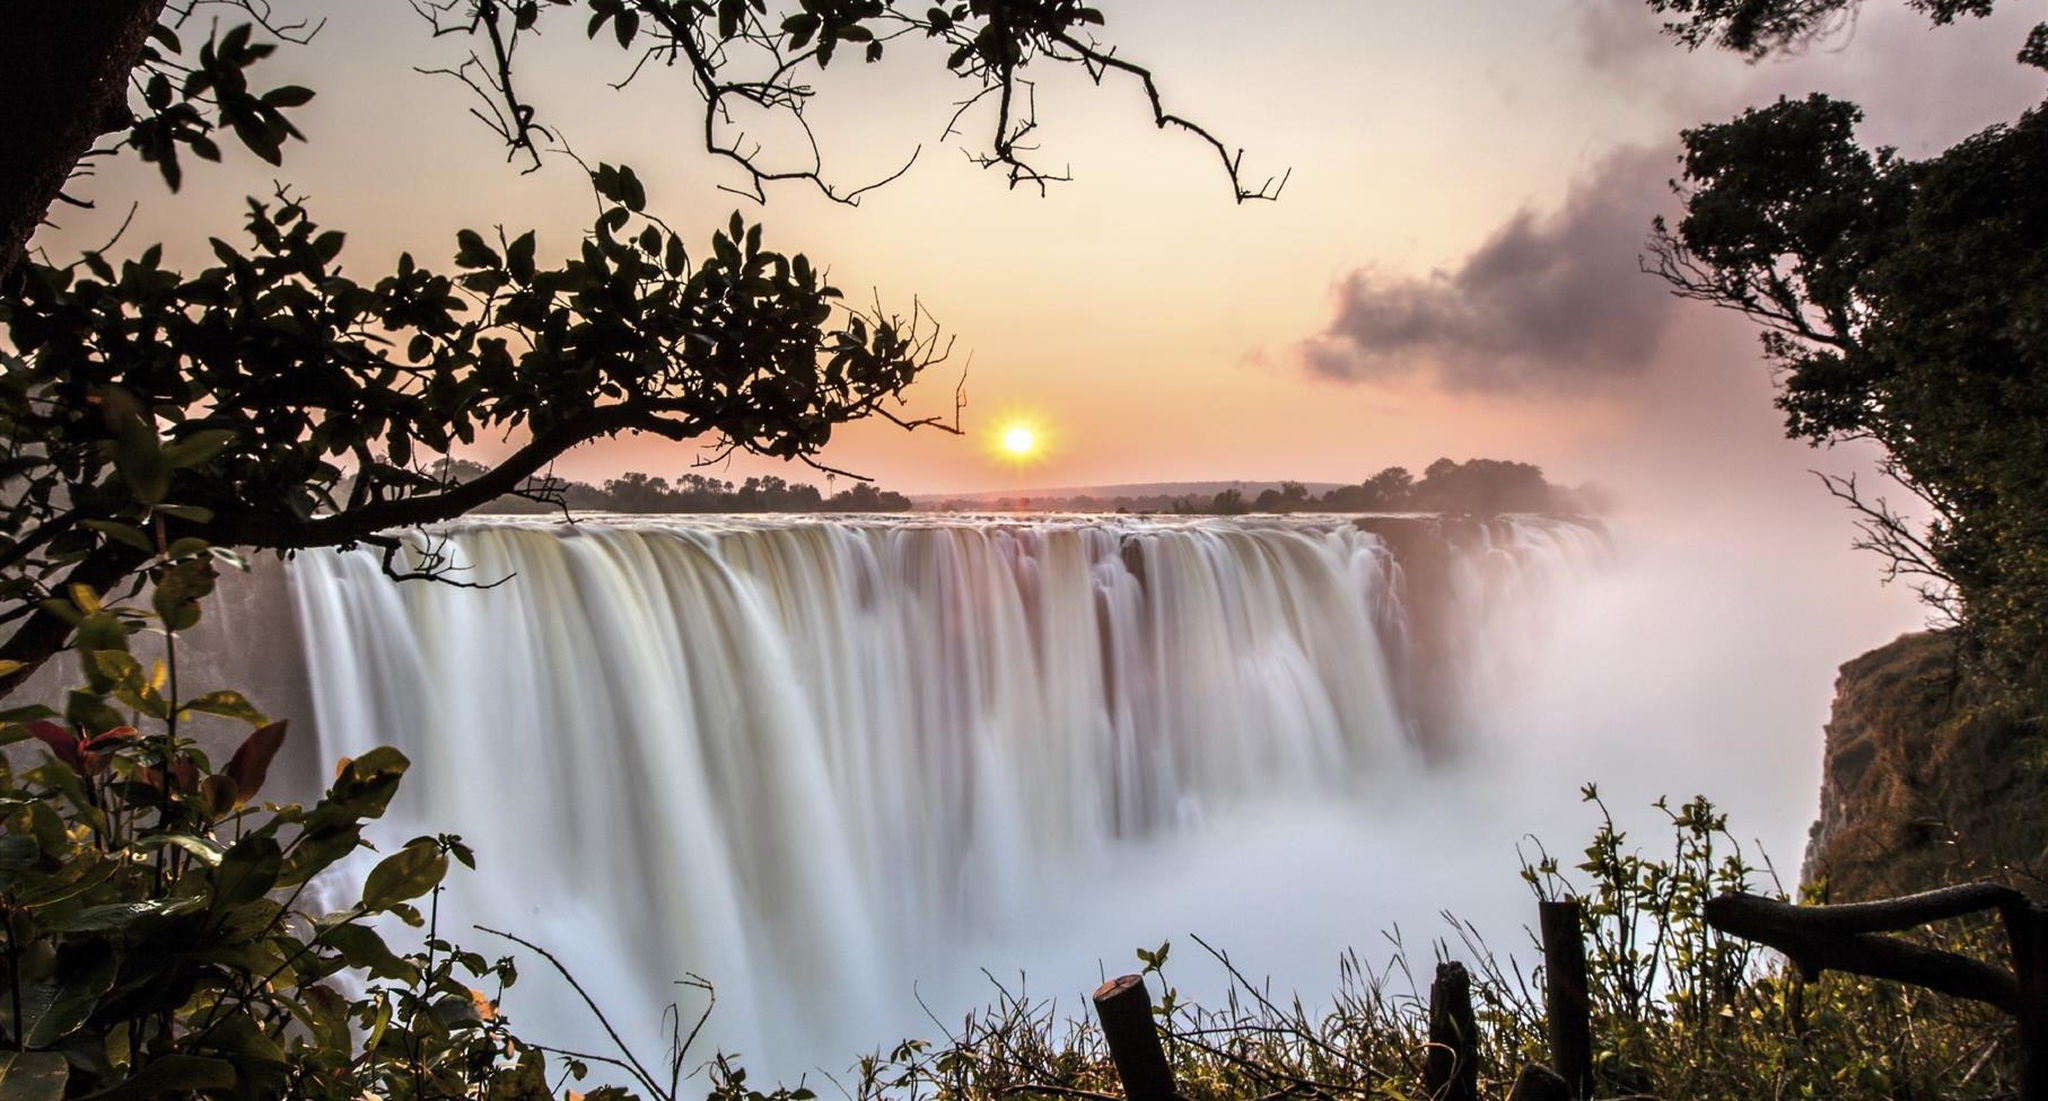 Sunset at Victoria Falls is one of the best places to propose in Africa